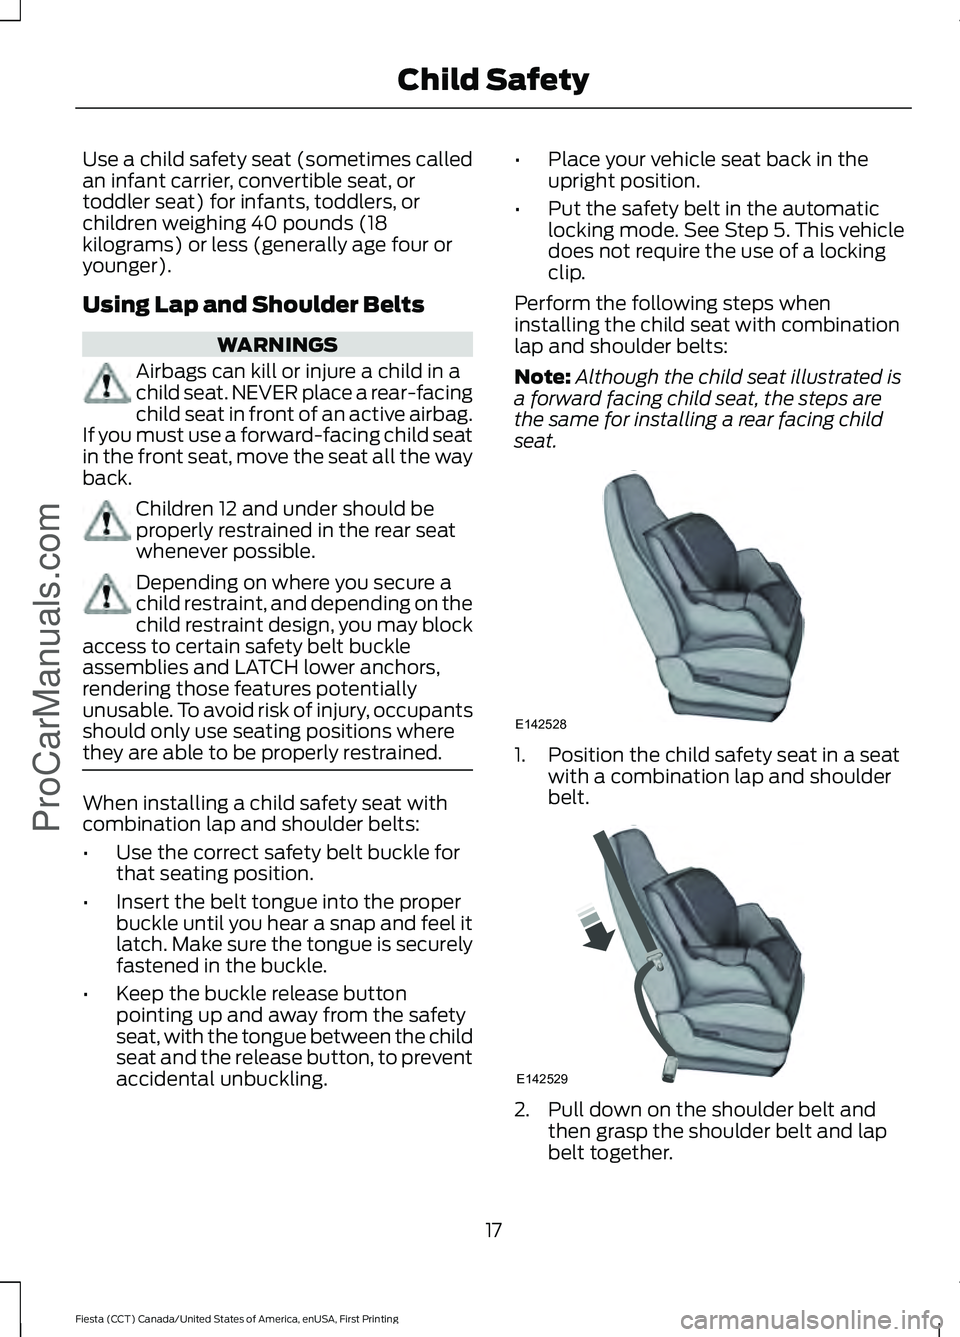 FORD FIESTA 2016  Owners Manual Use a child safety seat (sometimes called
an infant carrier, convertible seat, or
toddler seat) for infants, toddlers, or
children weighing 40 pounds (18
kilograms) or less (generally age four or
youn